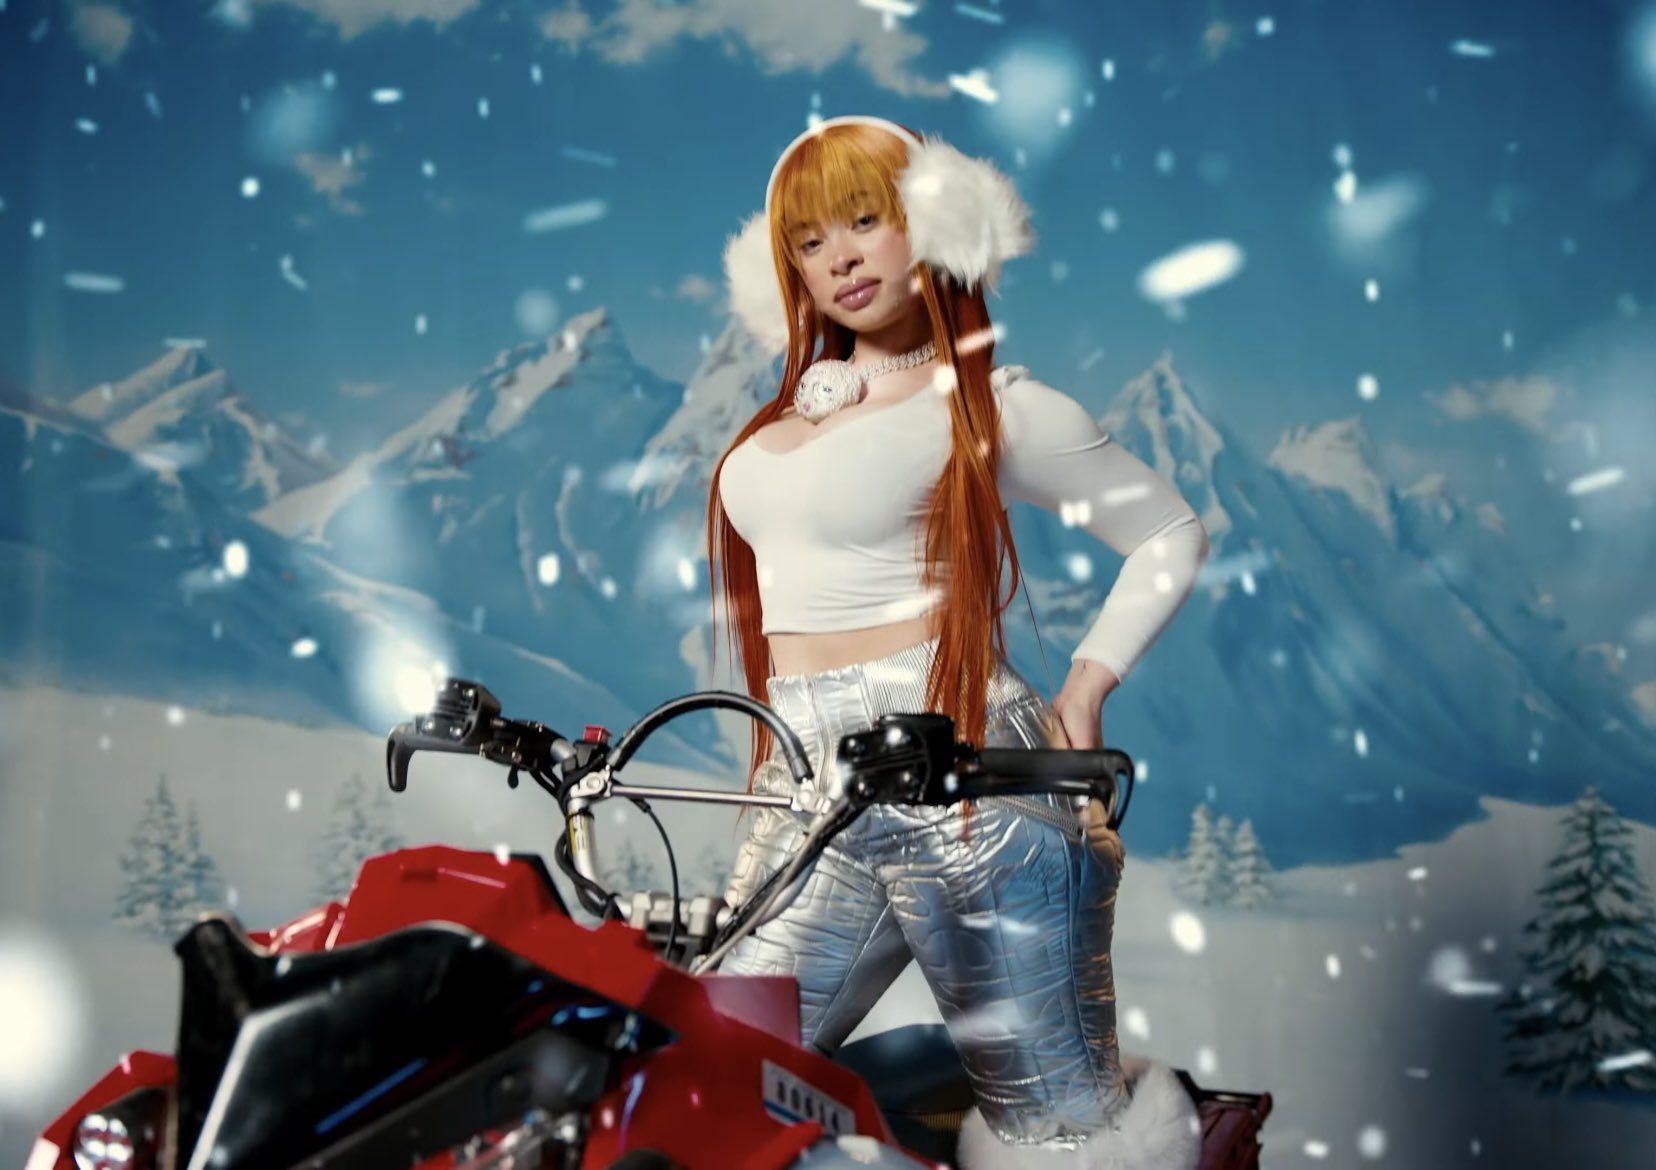 A woman with long red hair wearing a white top and sliver pants sitting on a red motorcycle in the snow. - Ice Spice